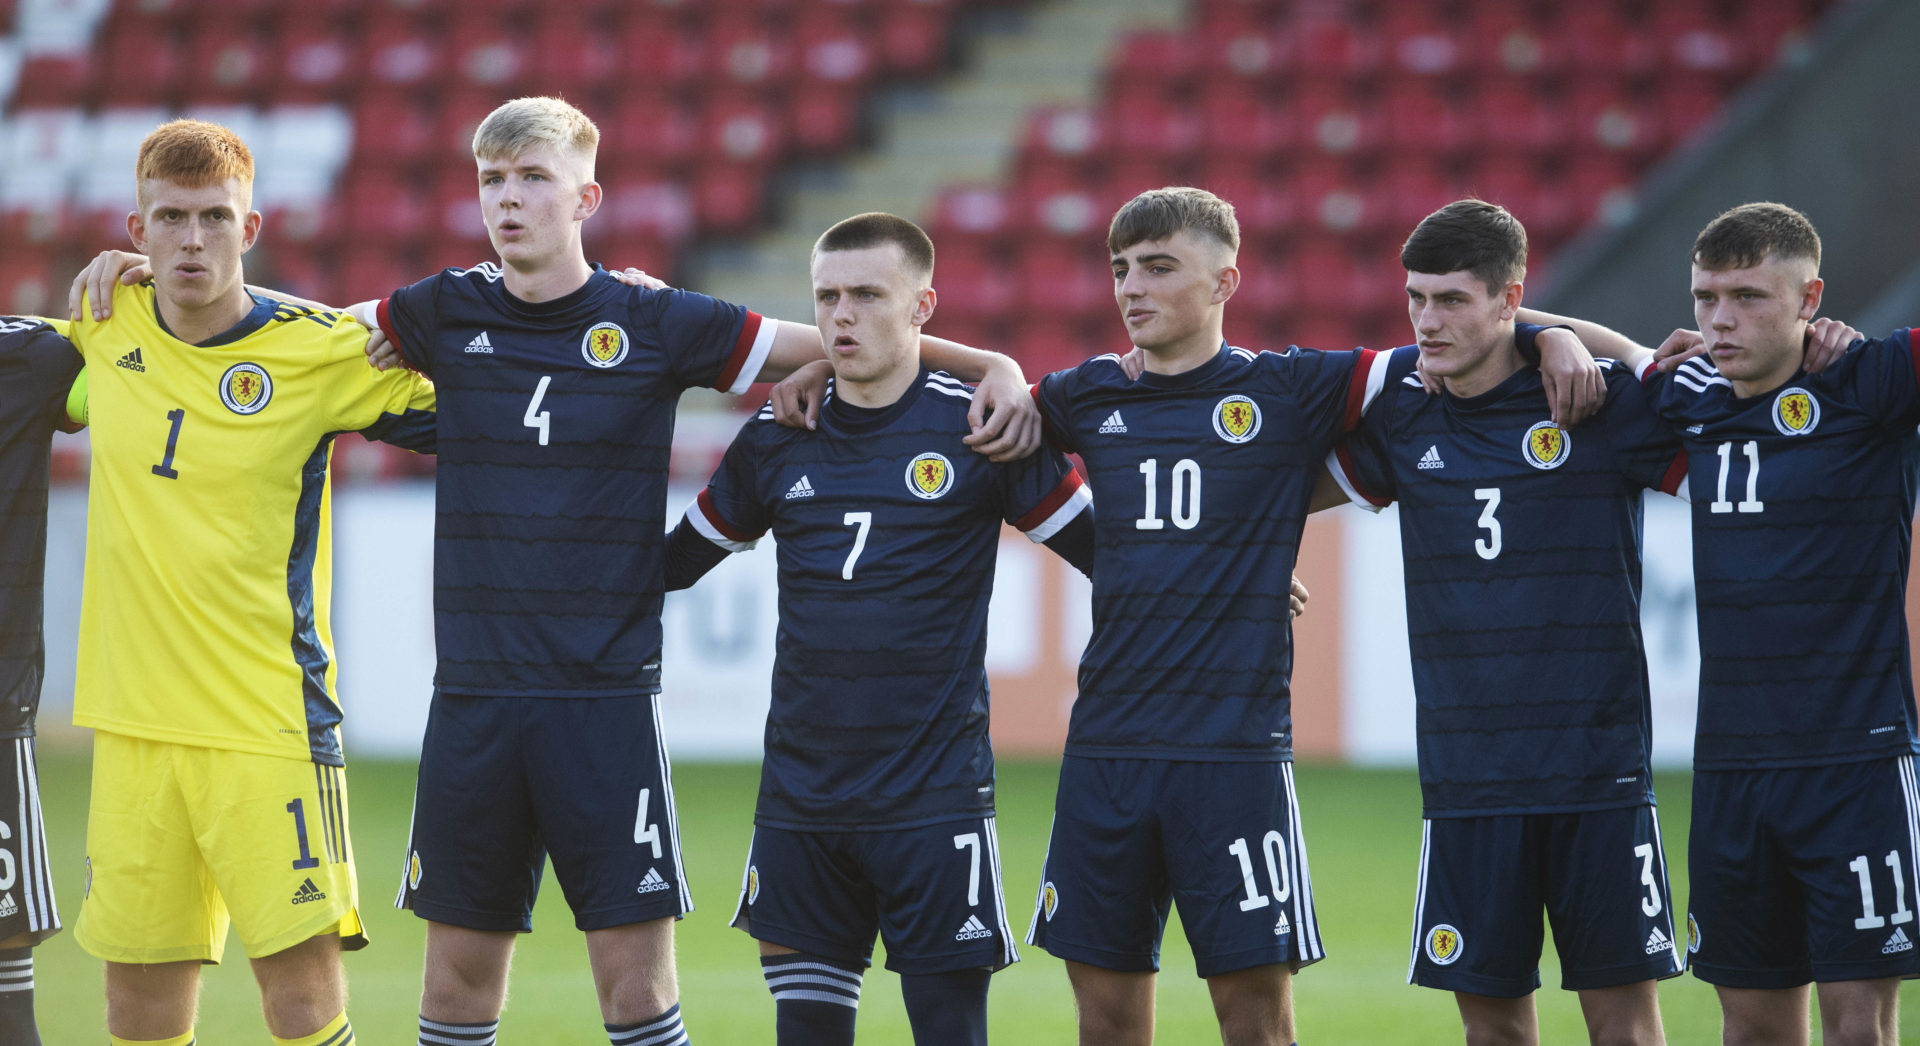 Scot Gemmill insists Scotland have superstars of their own as under-21s prepare for Spain test